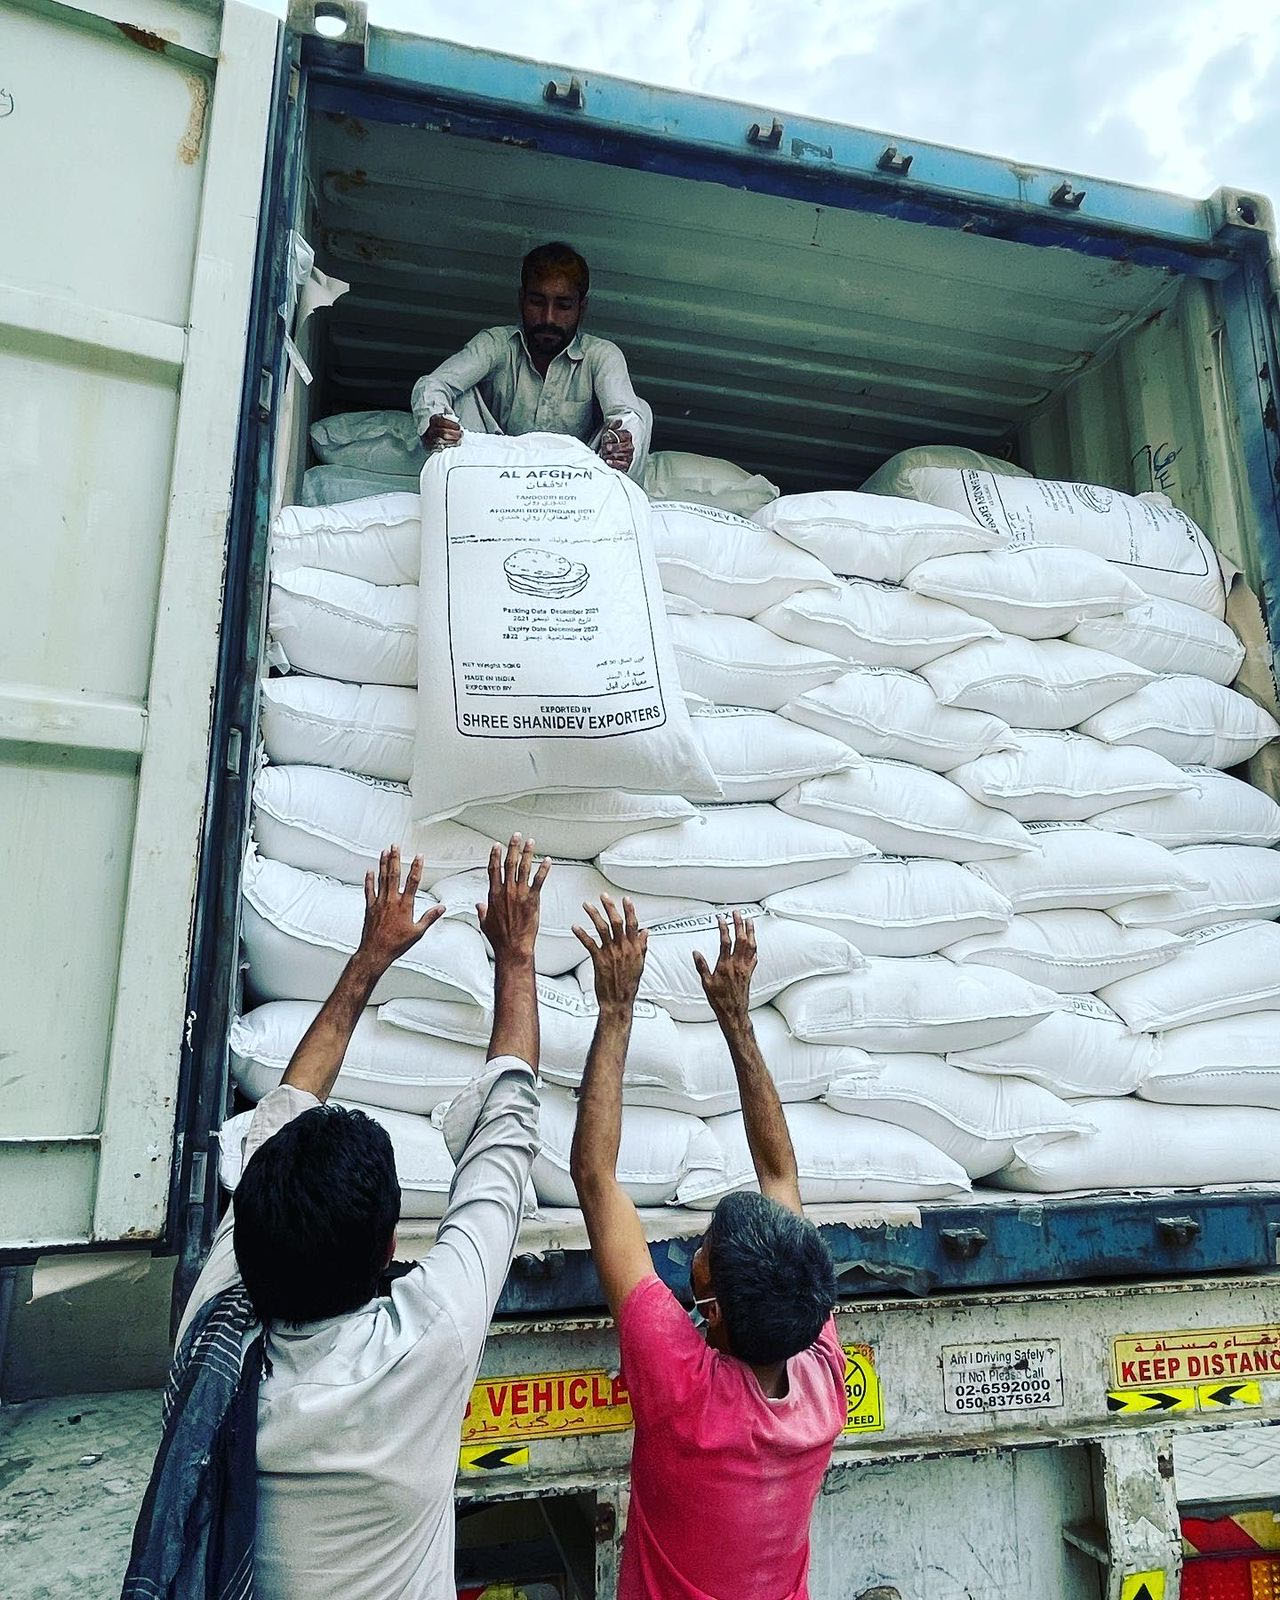 Refined flour exporter from India